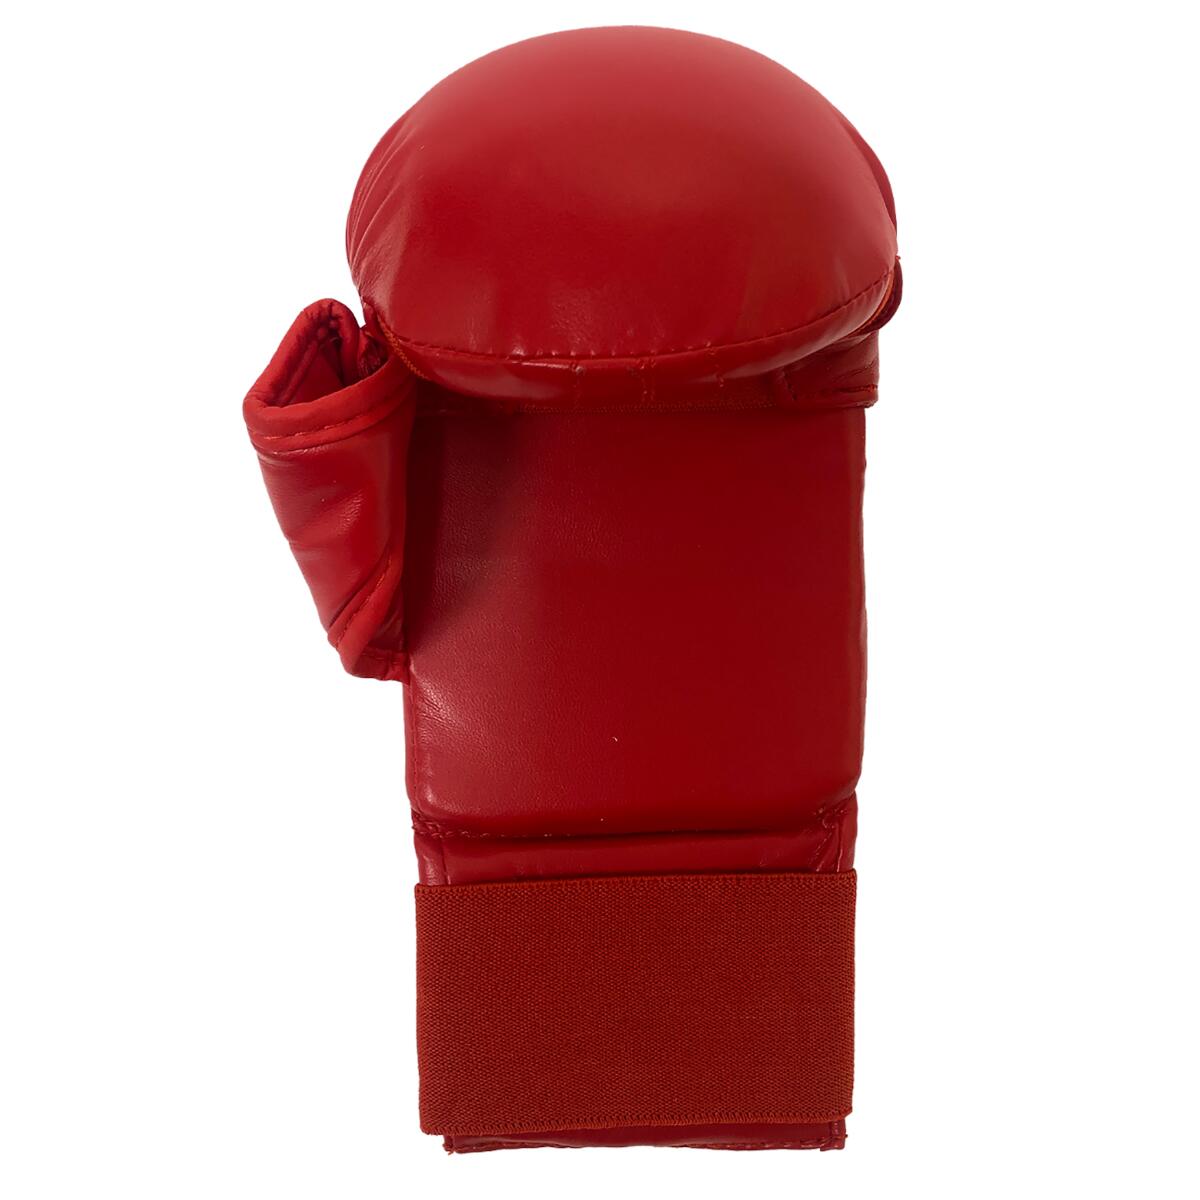 CIMAC COMPETITION KARATE MITTS WITH THUMB 4/4